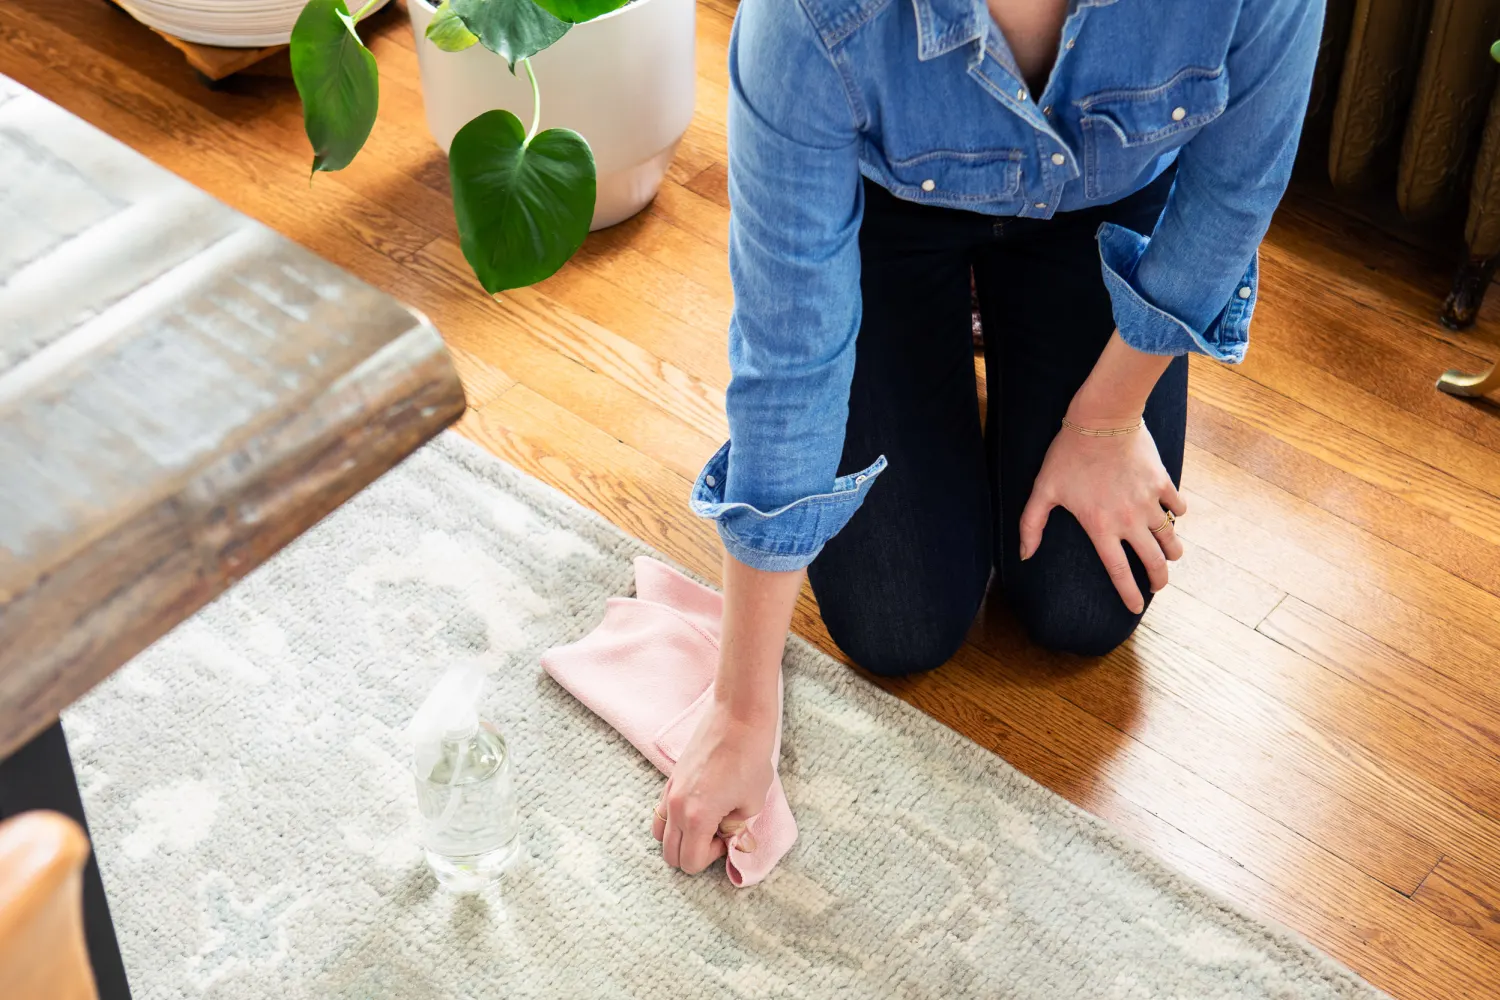 How To Remove Candle Wax From Carpet Or Rug